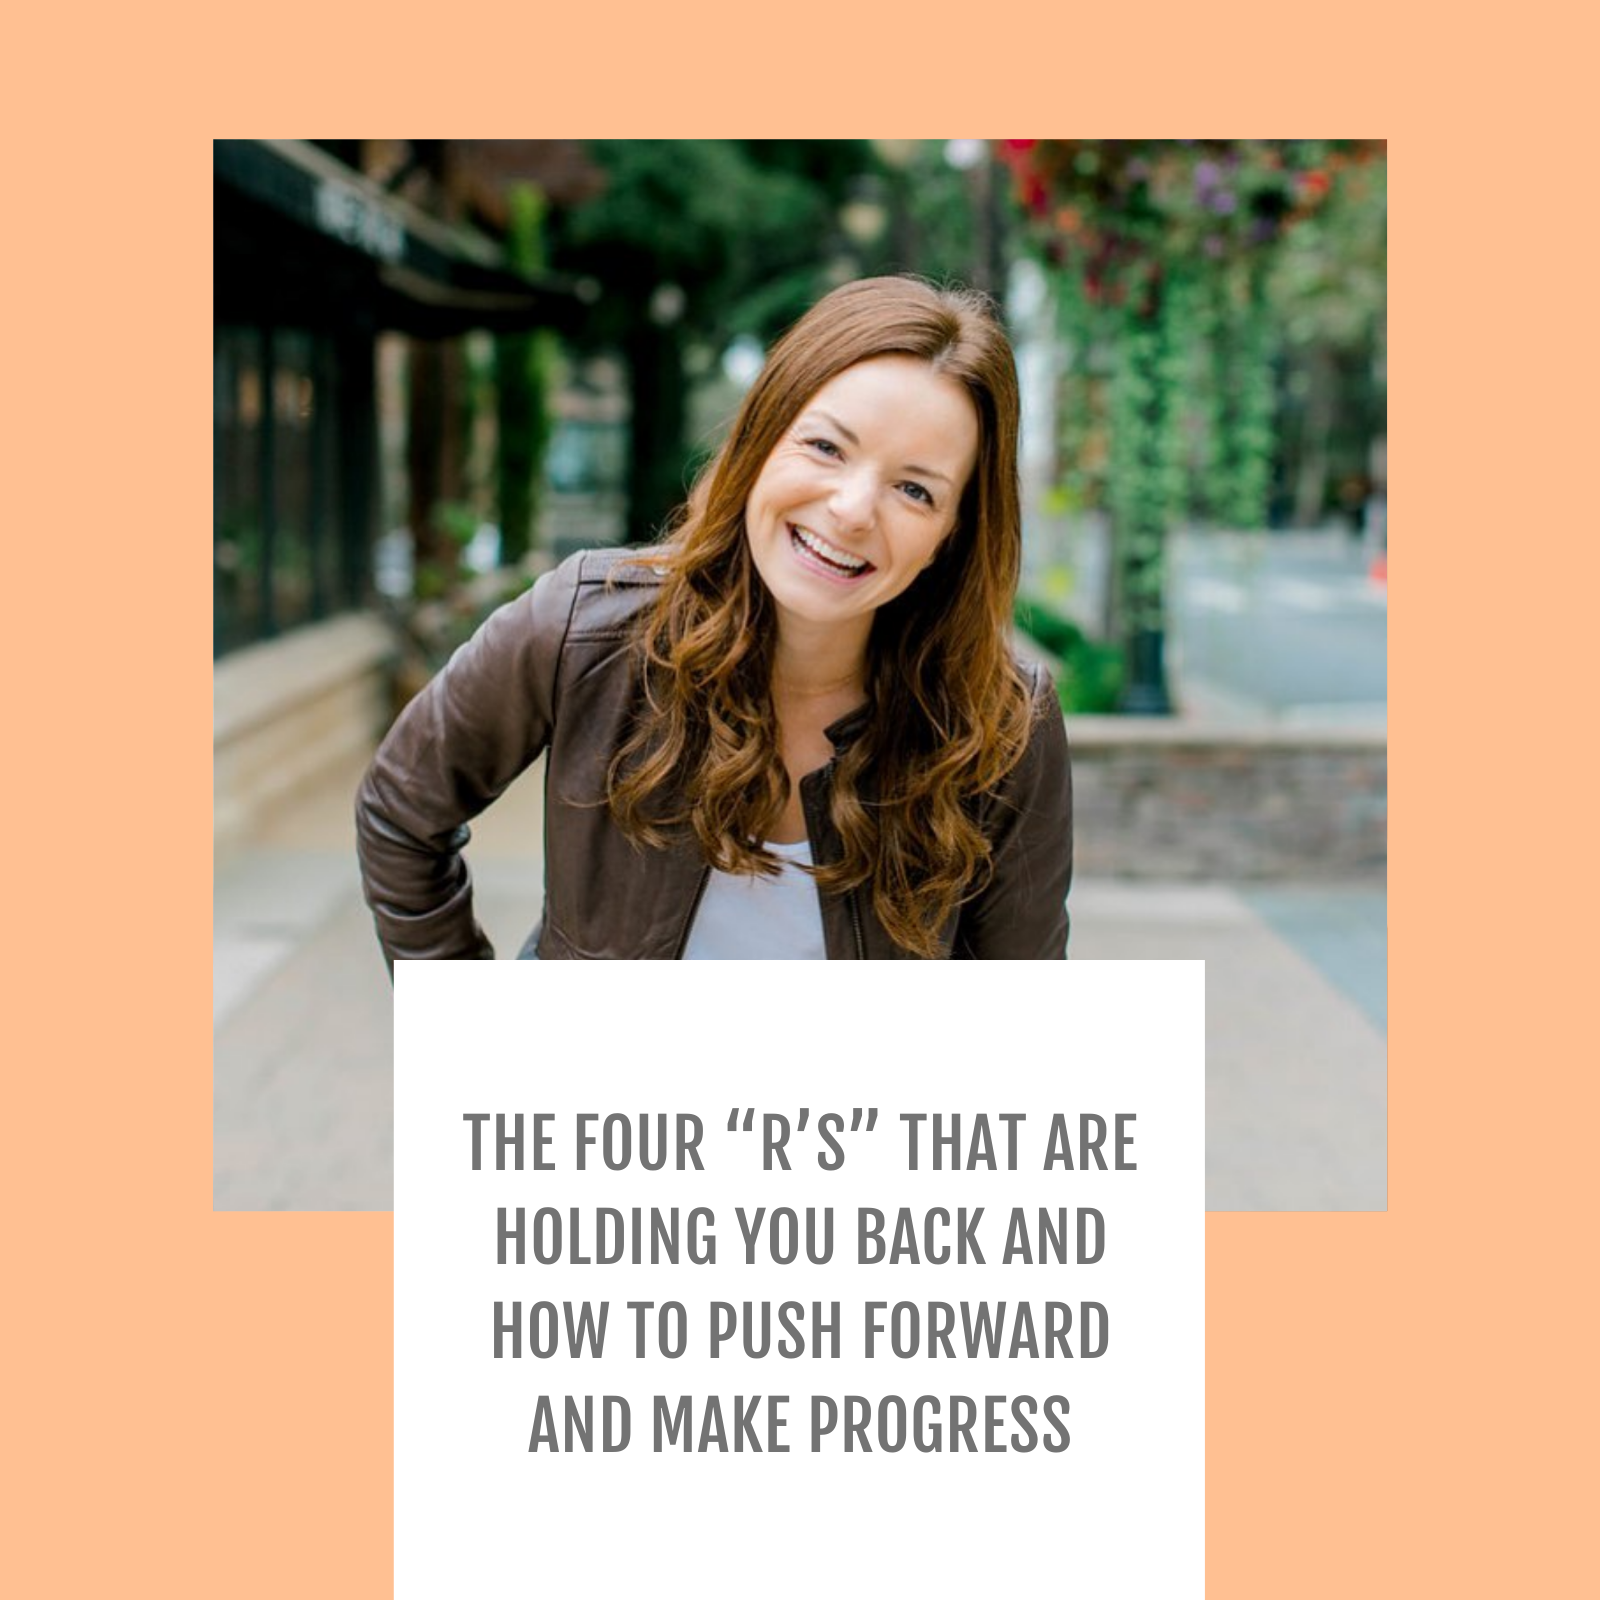 Episode #075-The four “R’s” that are holding you back and how to push forward and make progress